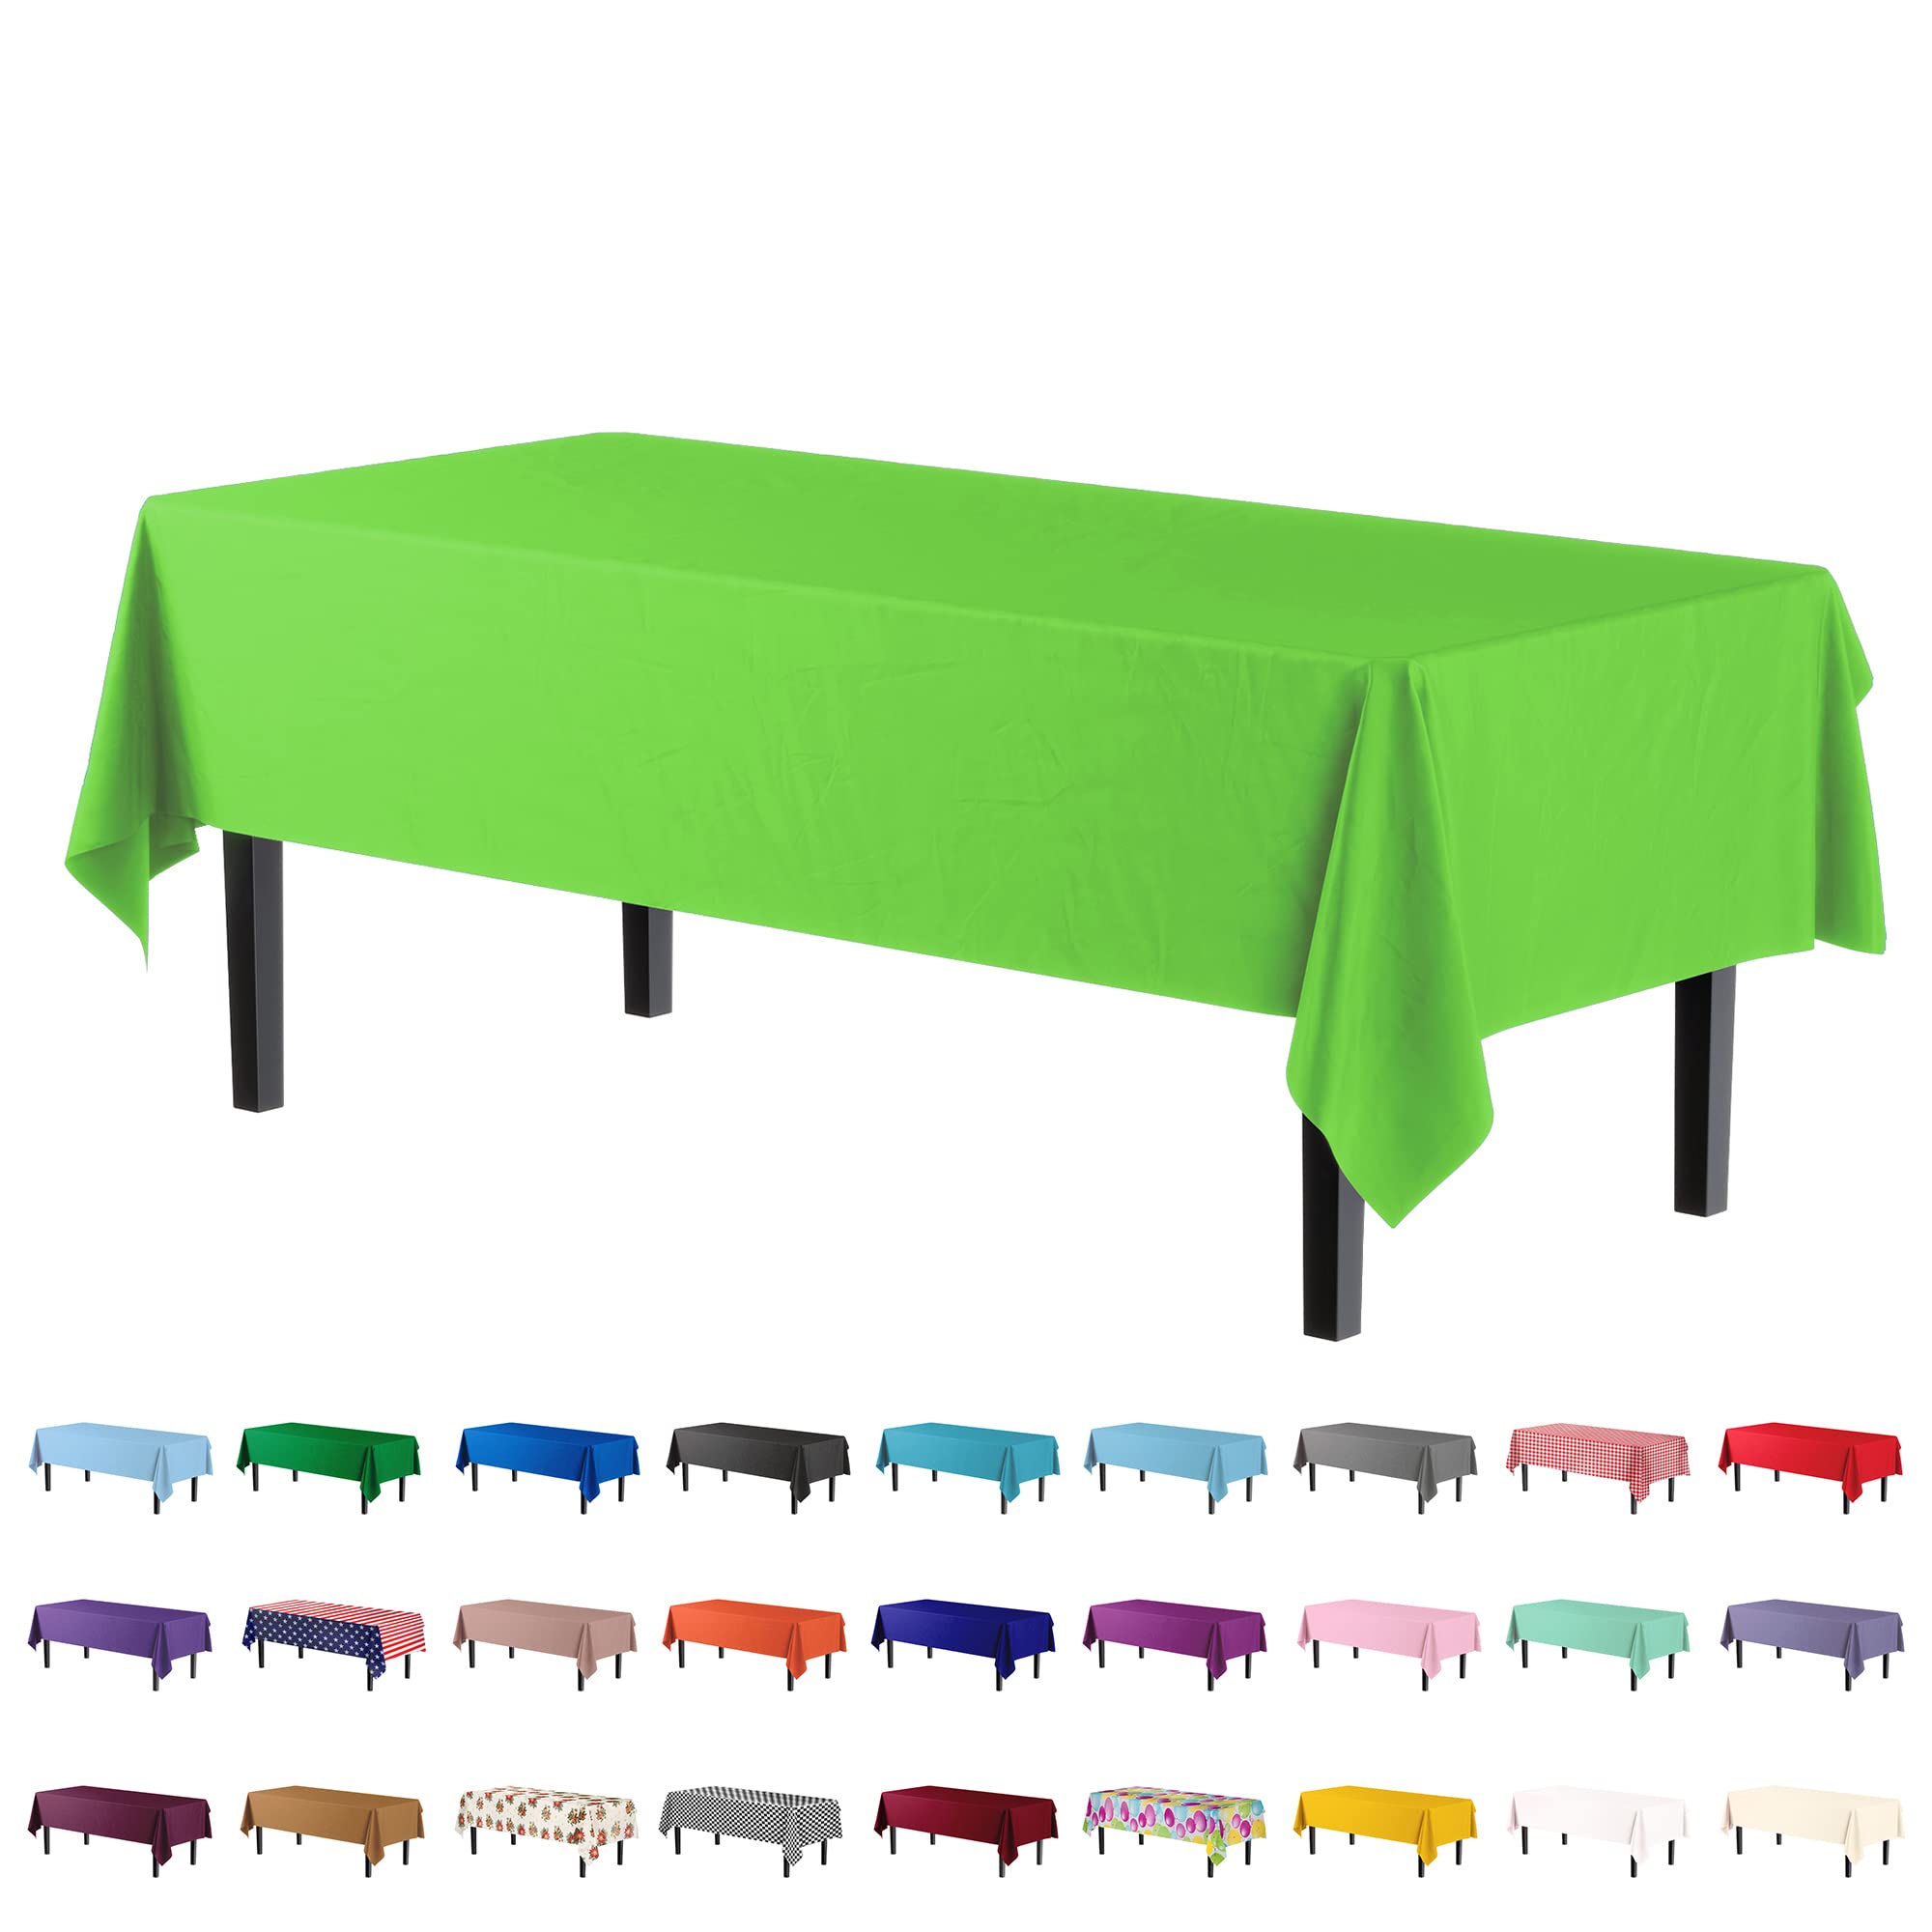 Premium Lime Green Table Cover